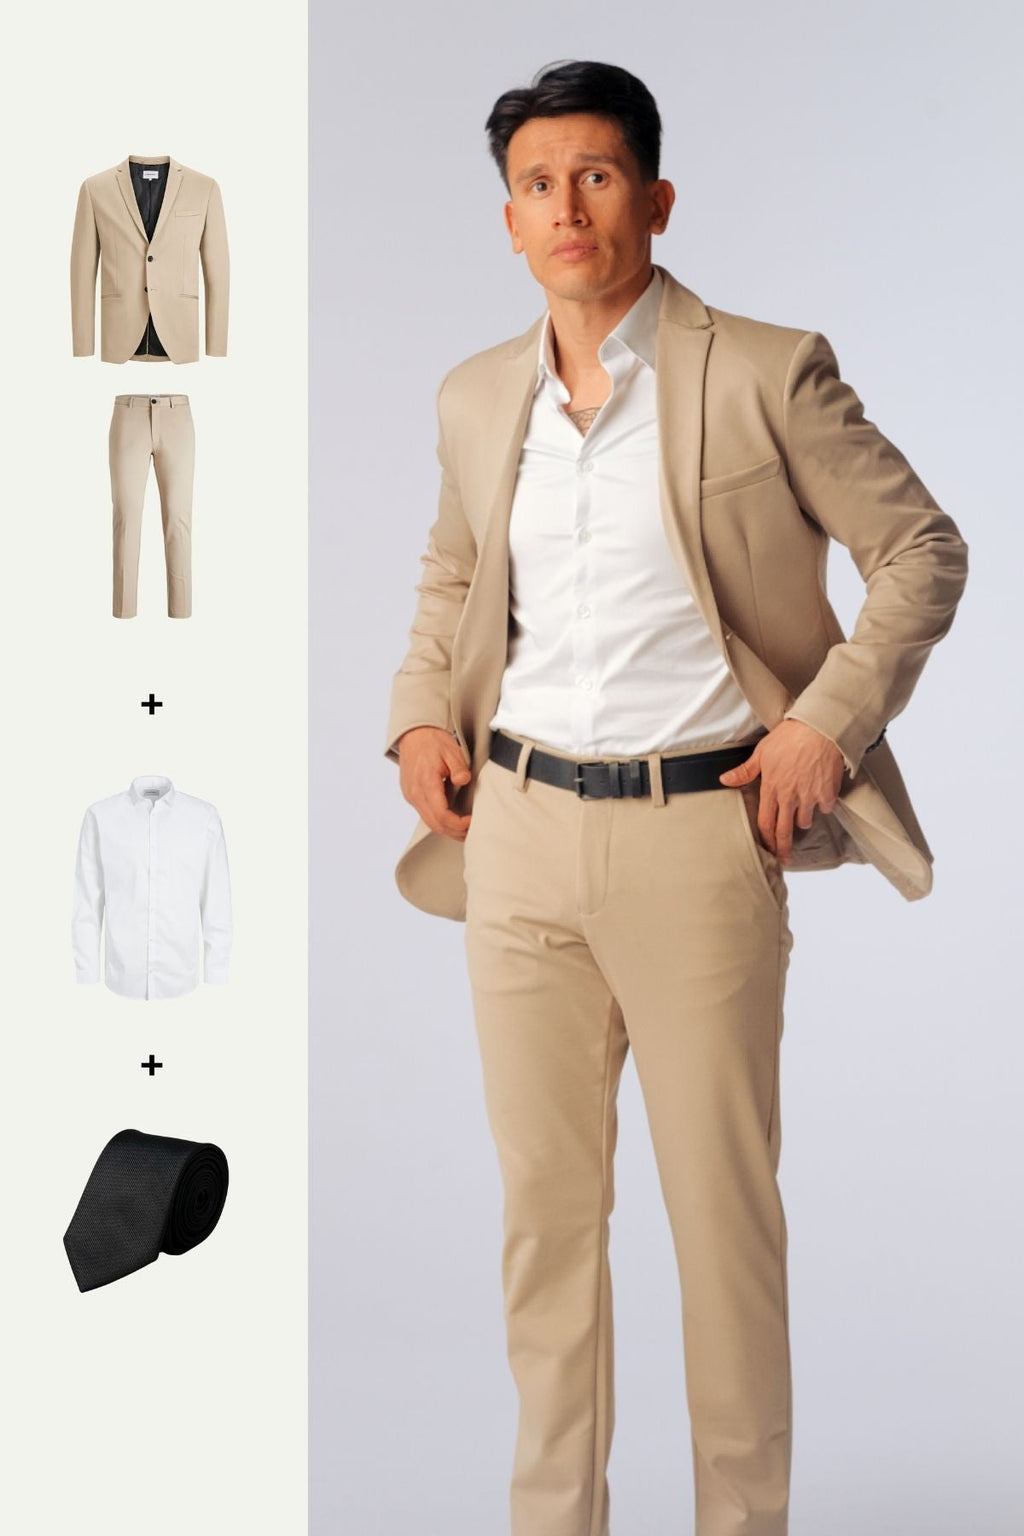 The Original Performance Suit™️ (Sand) + Shirt & Tie - Package Deal (V.I.P)